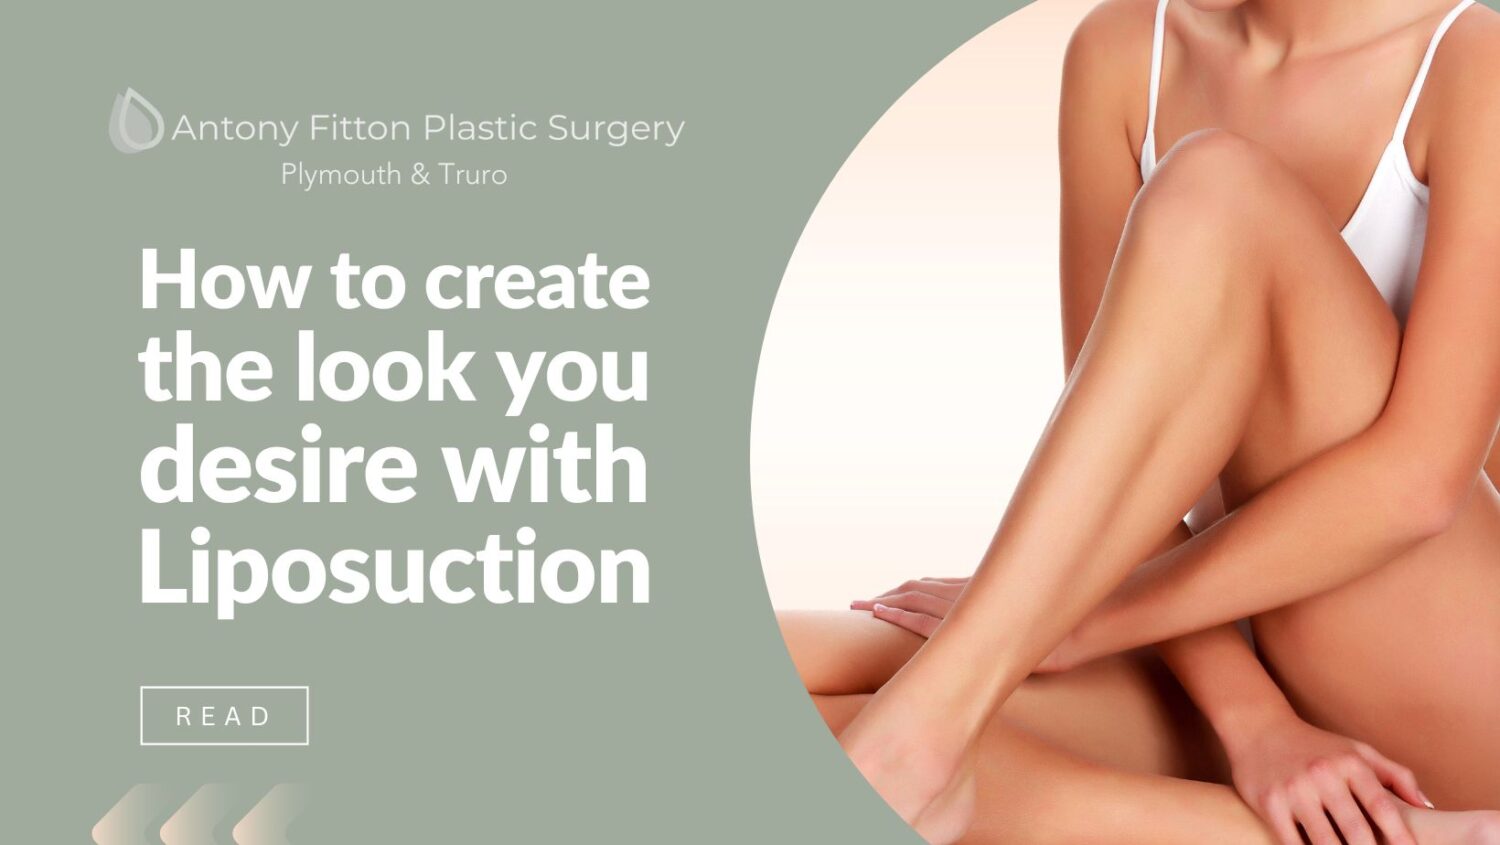 How to create the look you desire with Liposuction | Antony Fitton Plastic Surgery | Plymouth and Truro